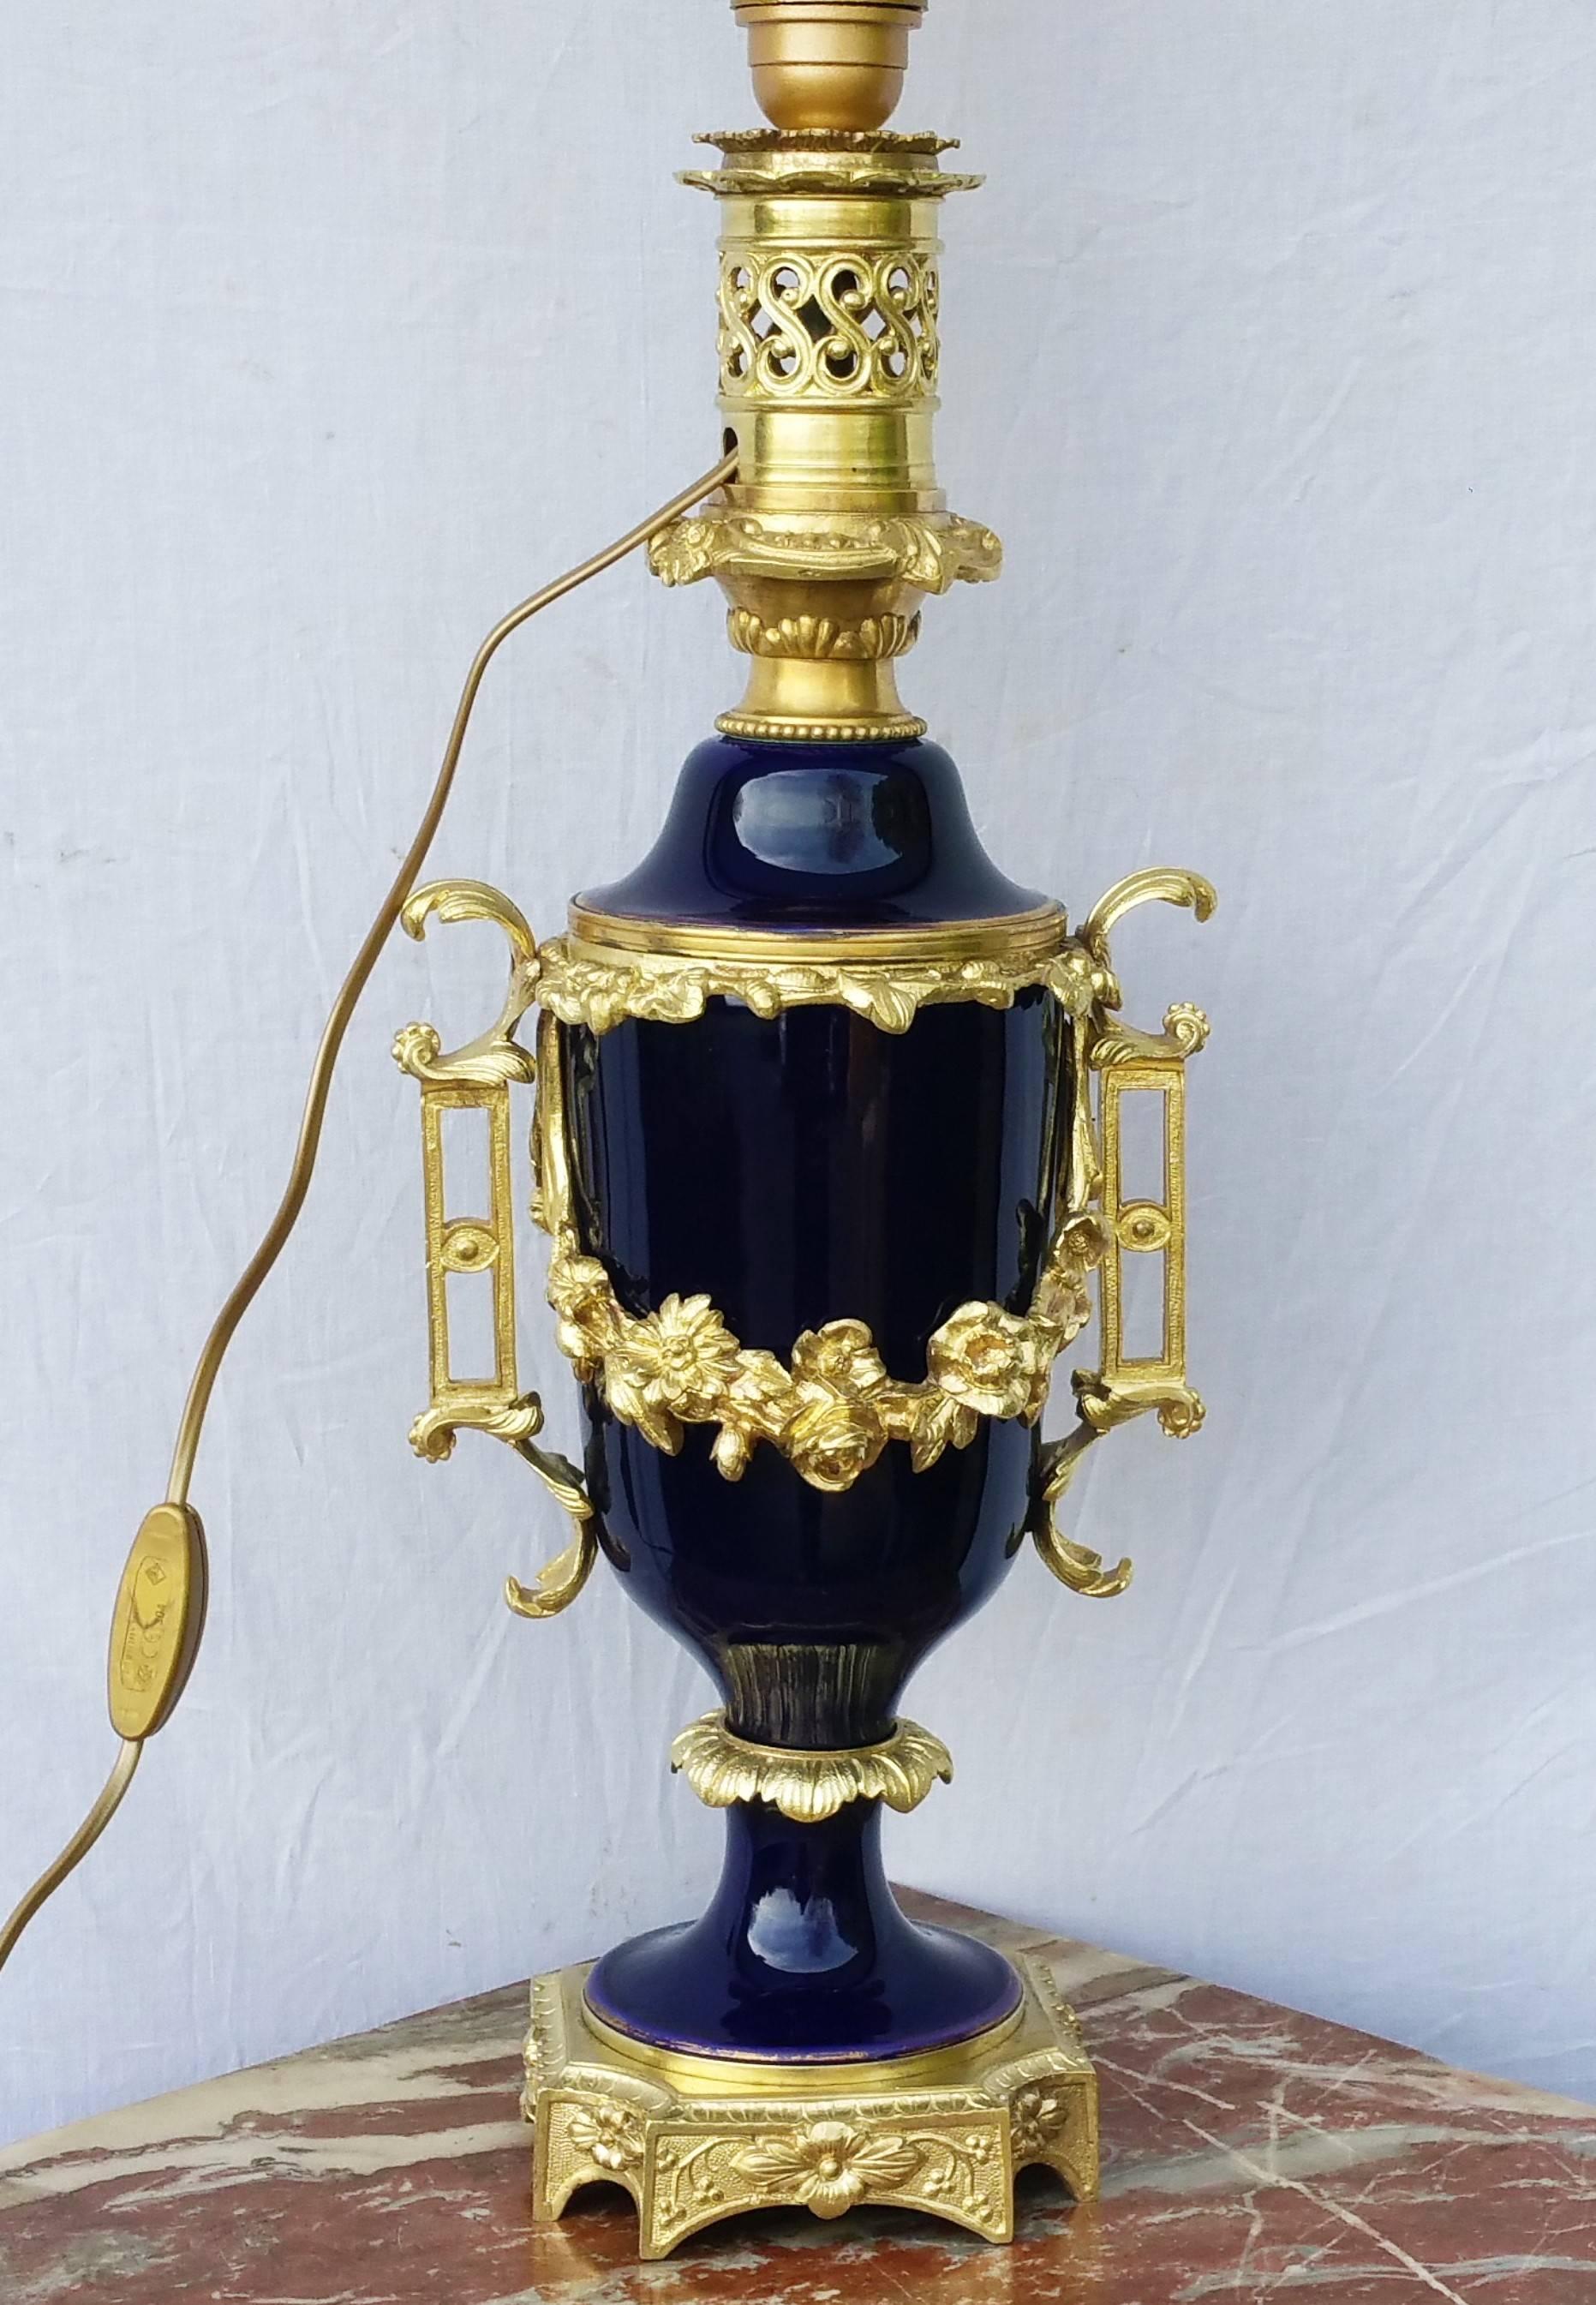 Very elegant blue of Sèvres Porcelain and gilt bronze, tall authentic table oil lamp richly decorated with gilt bronze ornaments. Napoleon III style.
It has been wired later on to become an electric table lamp as logically by the time it used to be